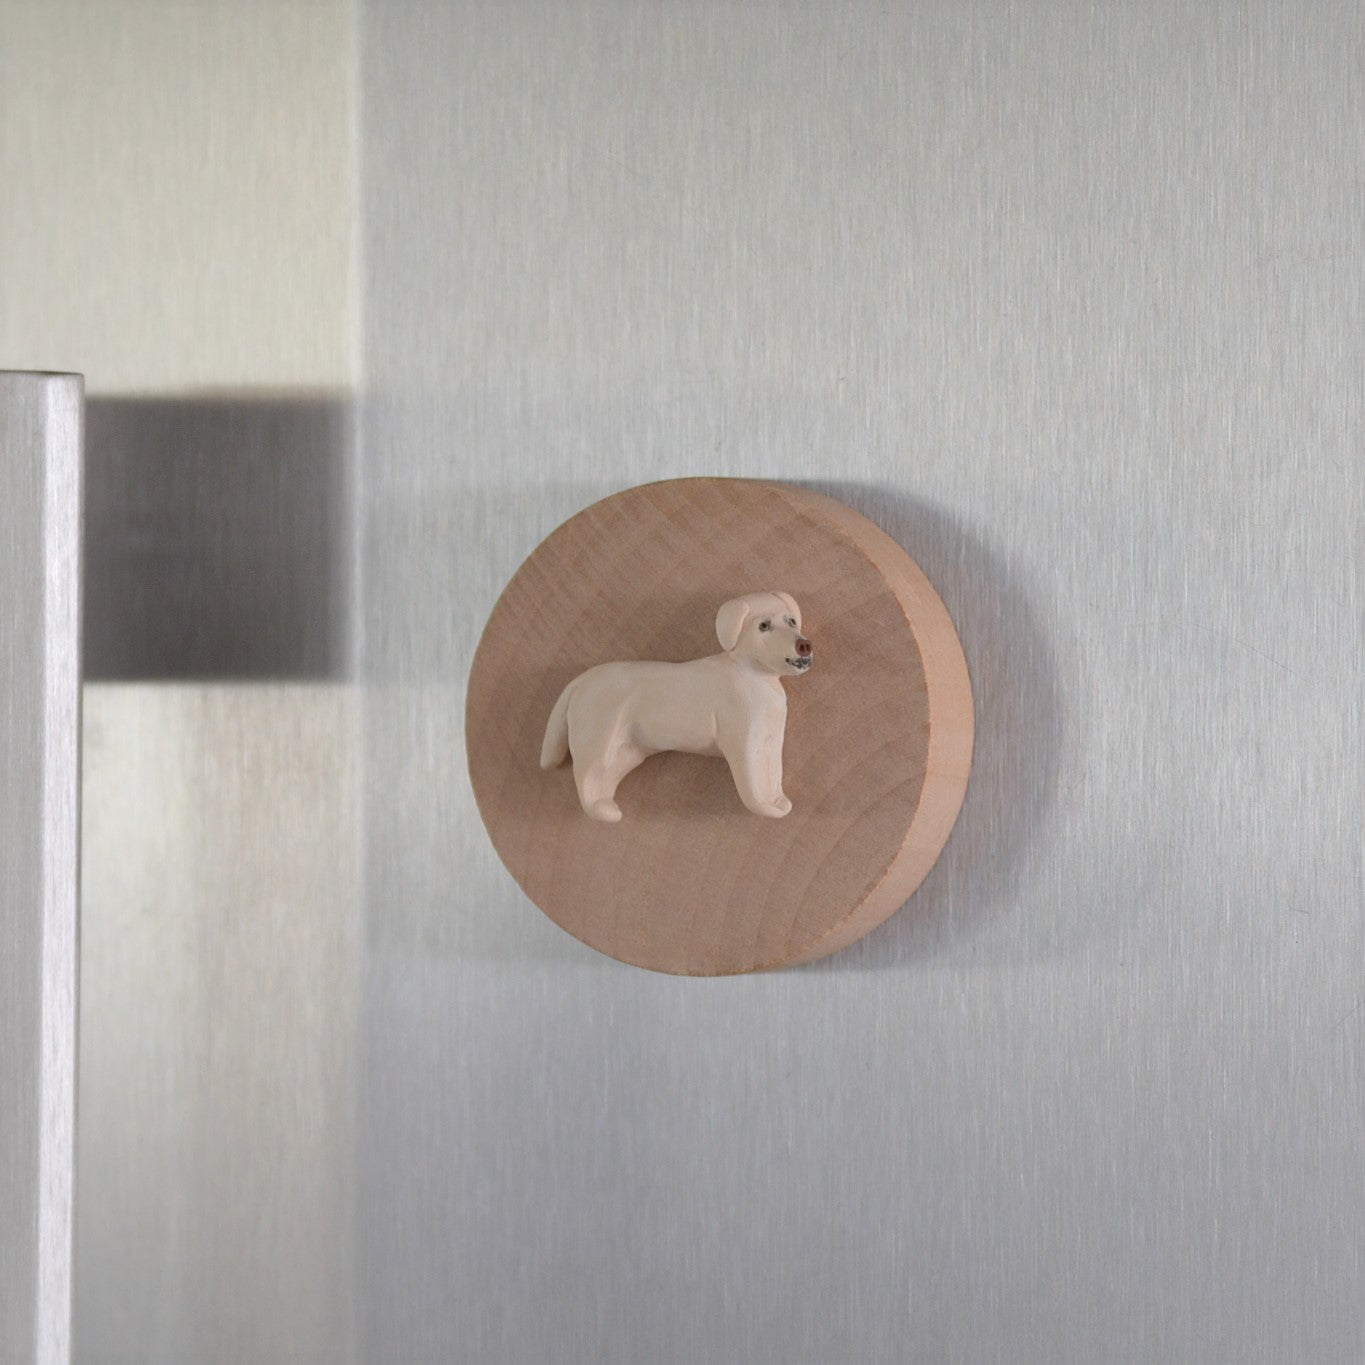 Timber bottle opener with handmade clay yellow lab sculpture attached displayed on fridge